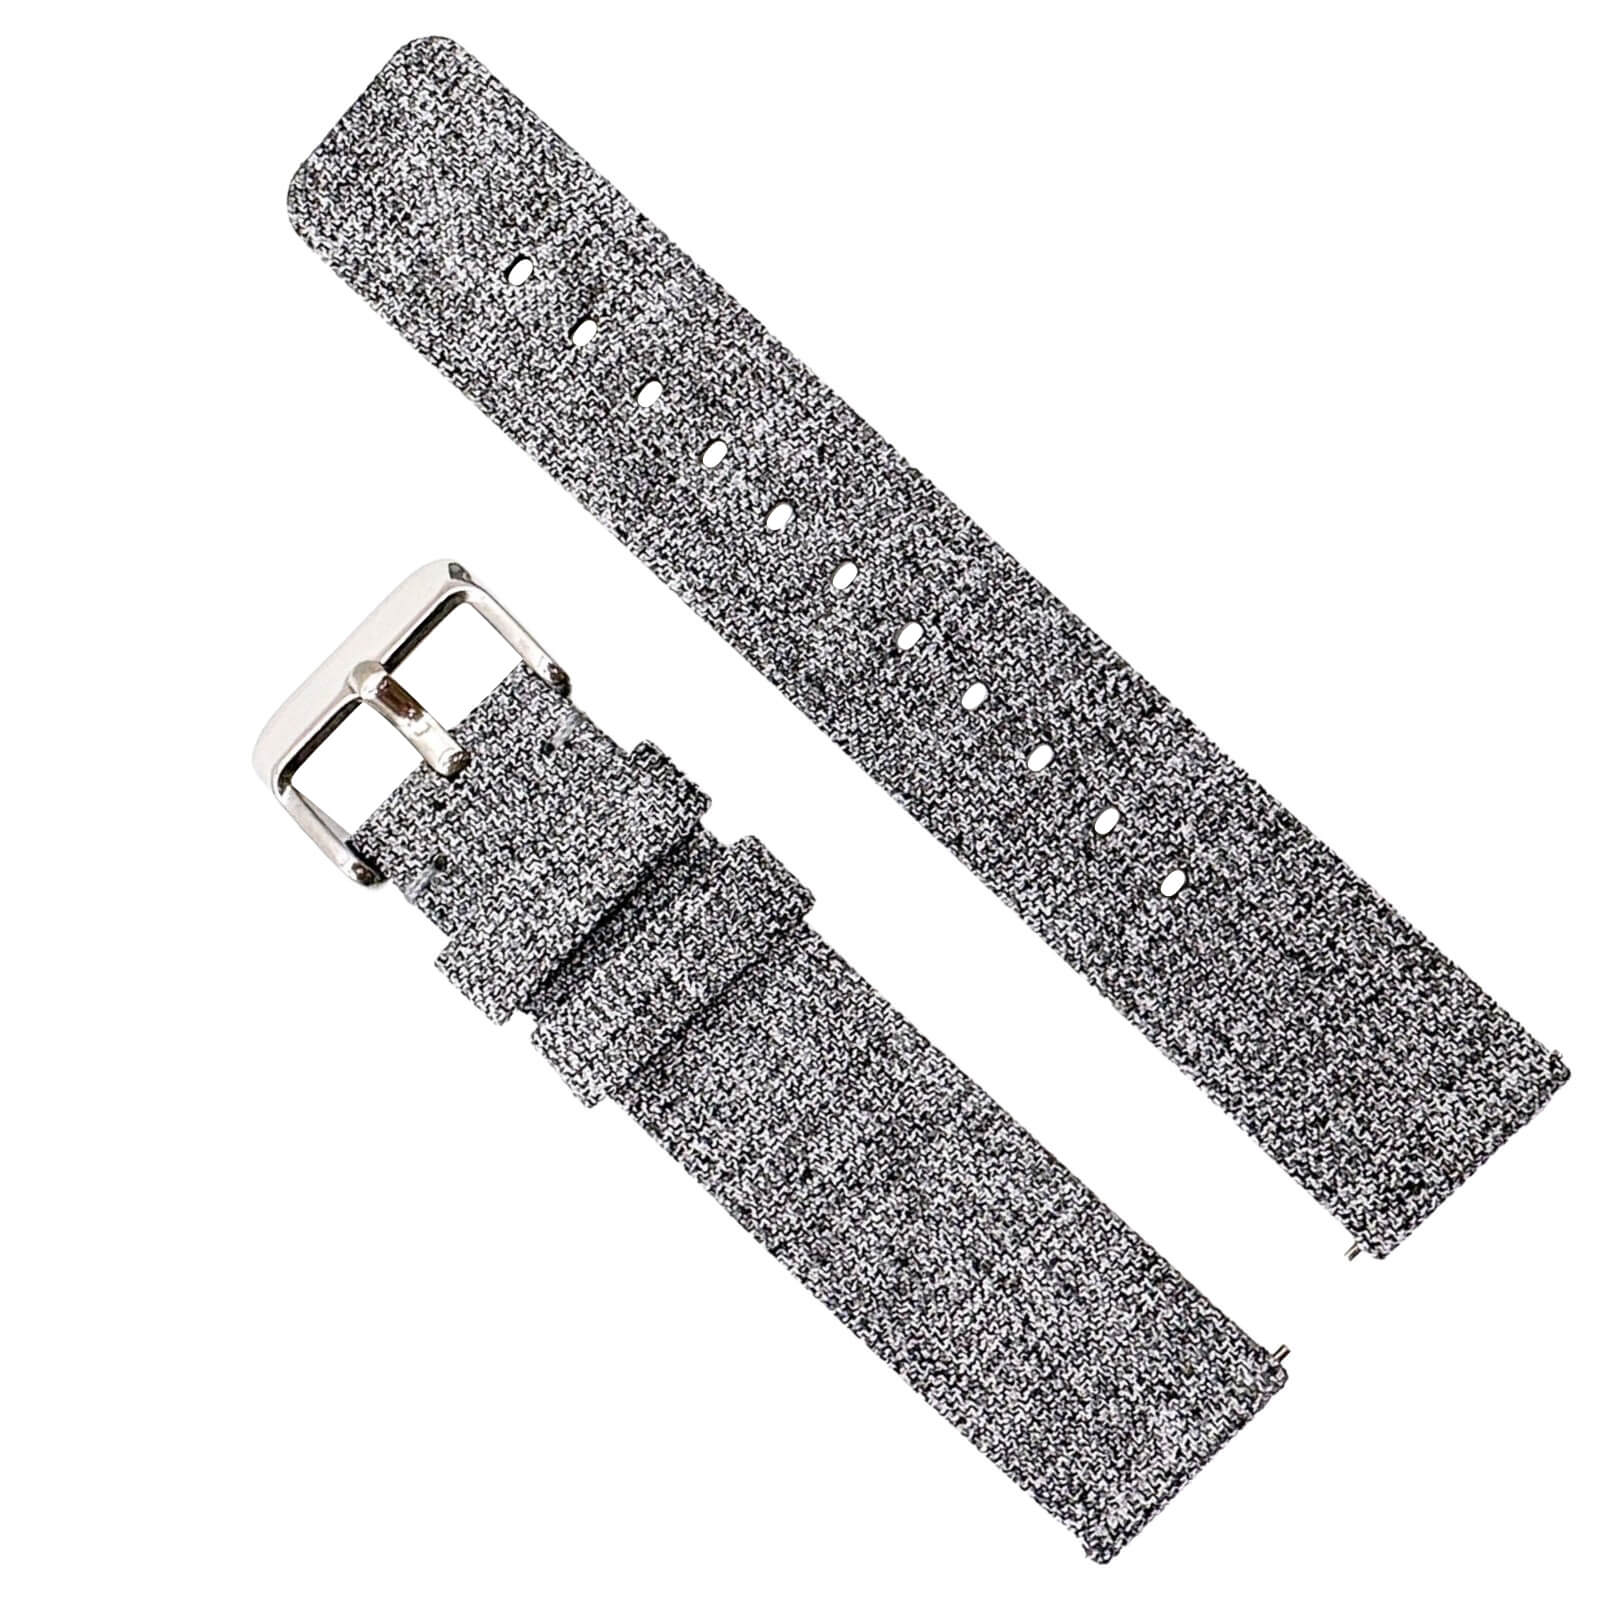 Woven Nylon Fabric Quick Release Watch Strap Grey 1